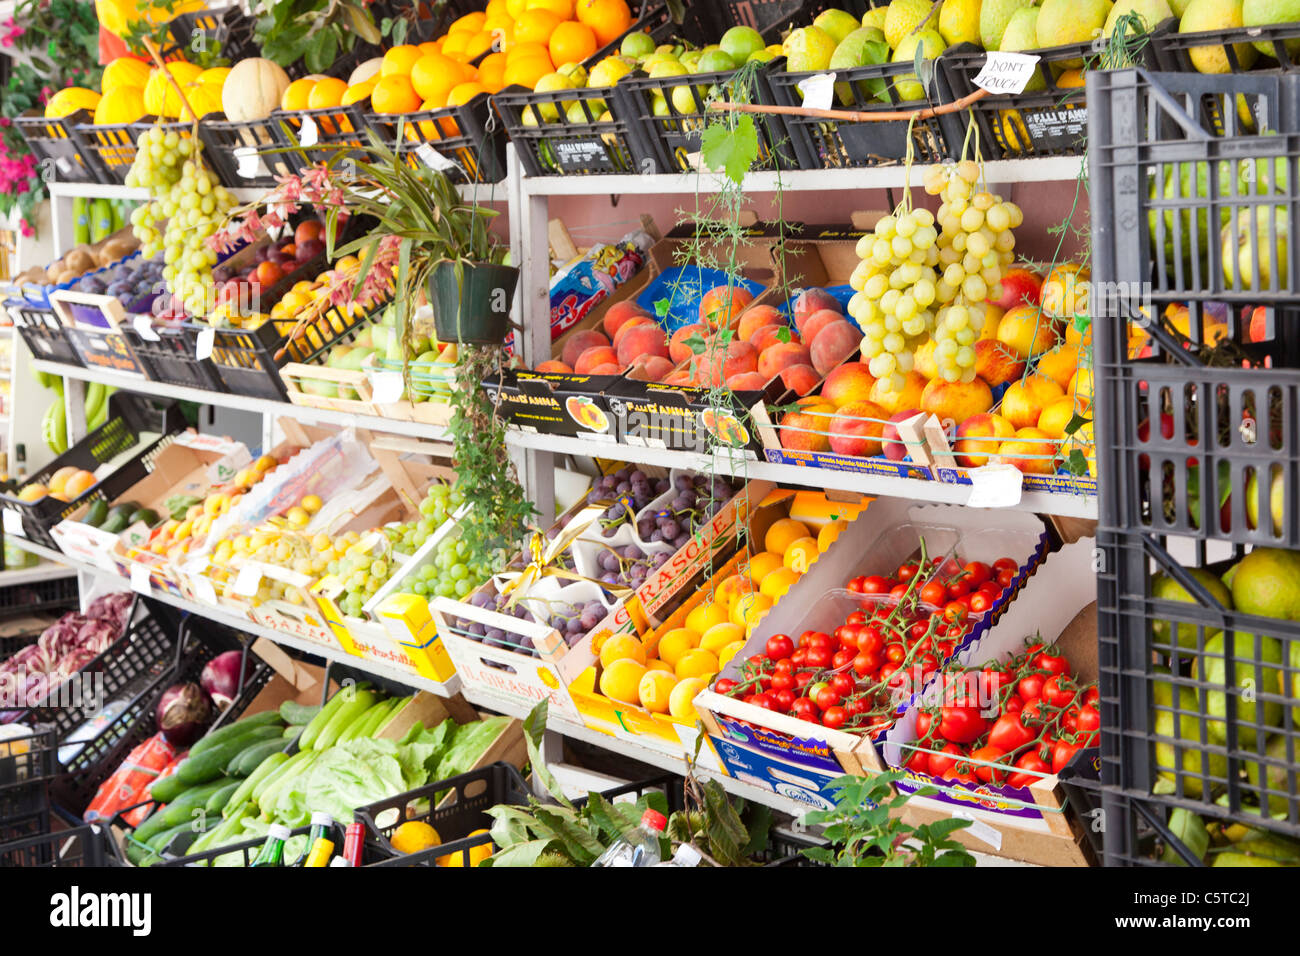 Shop selling fruit and vegetables in Taormina Sicily Italy Stock Photo